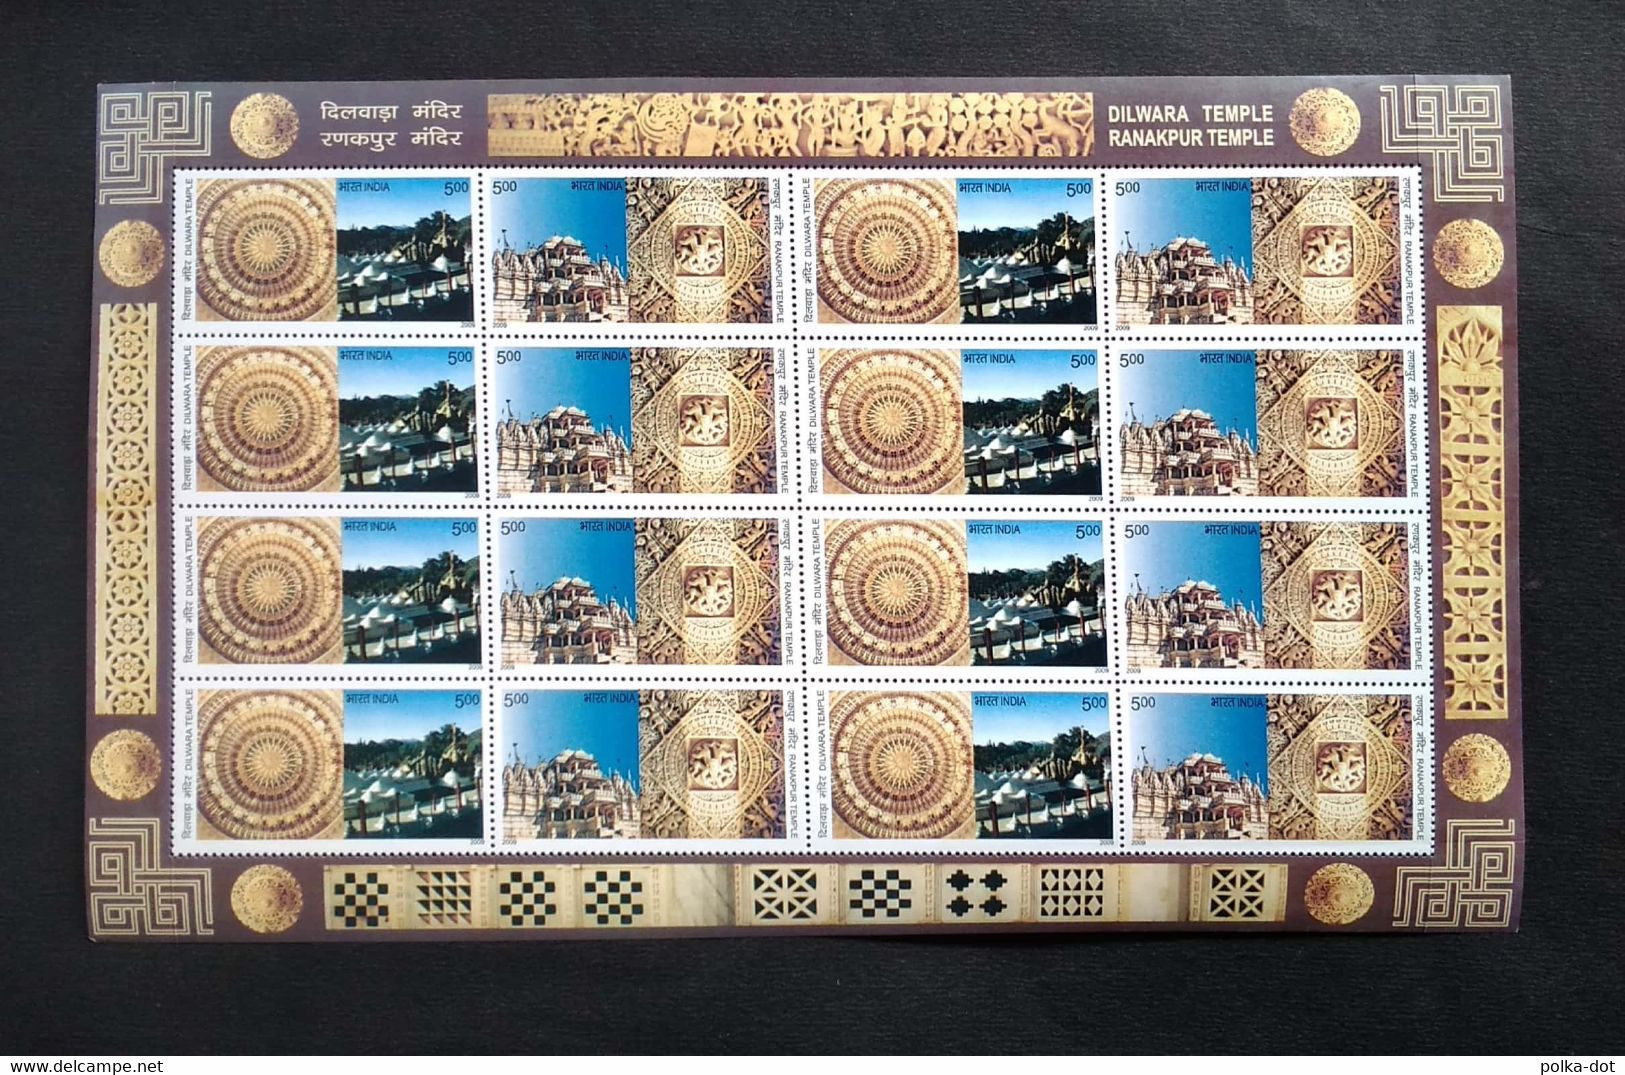 INDIA COMMEMORATIVE SHEETS AND SHEETLETS 22 DIFFERENT MNH